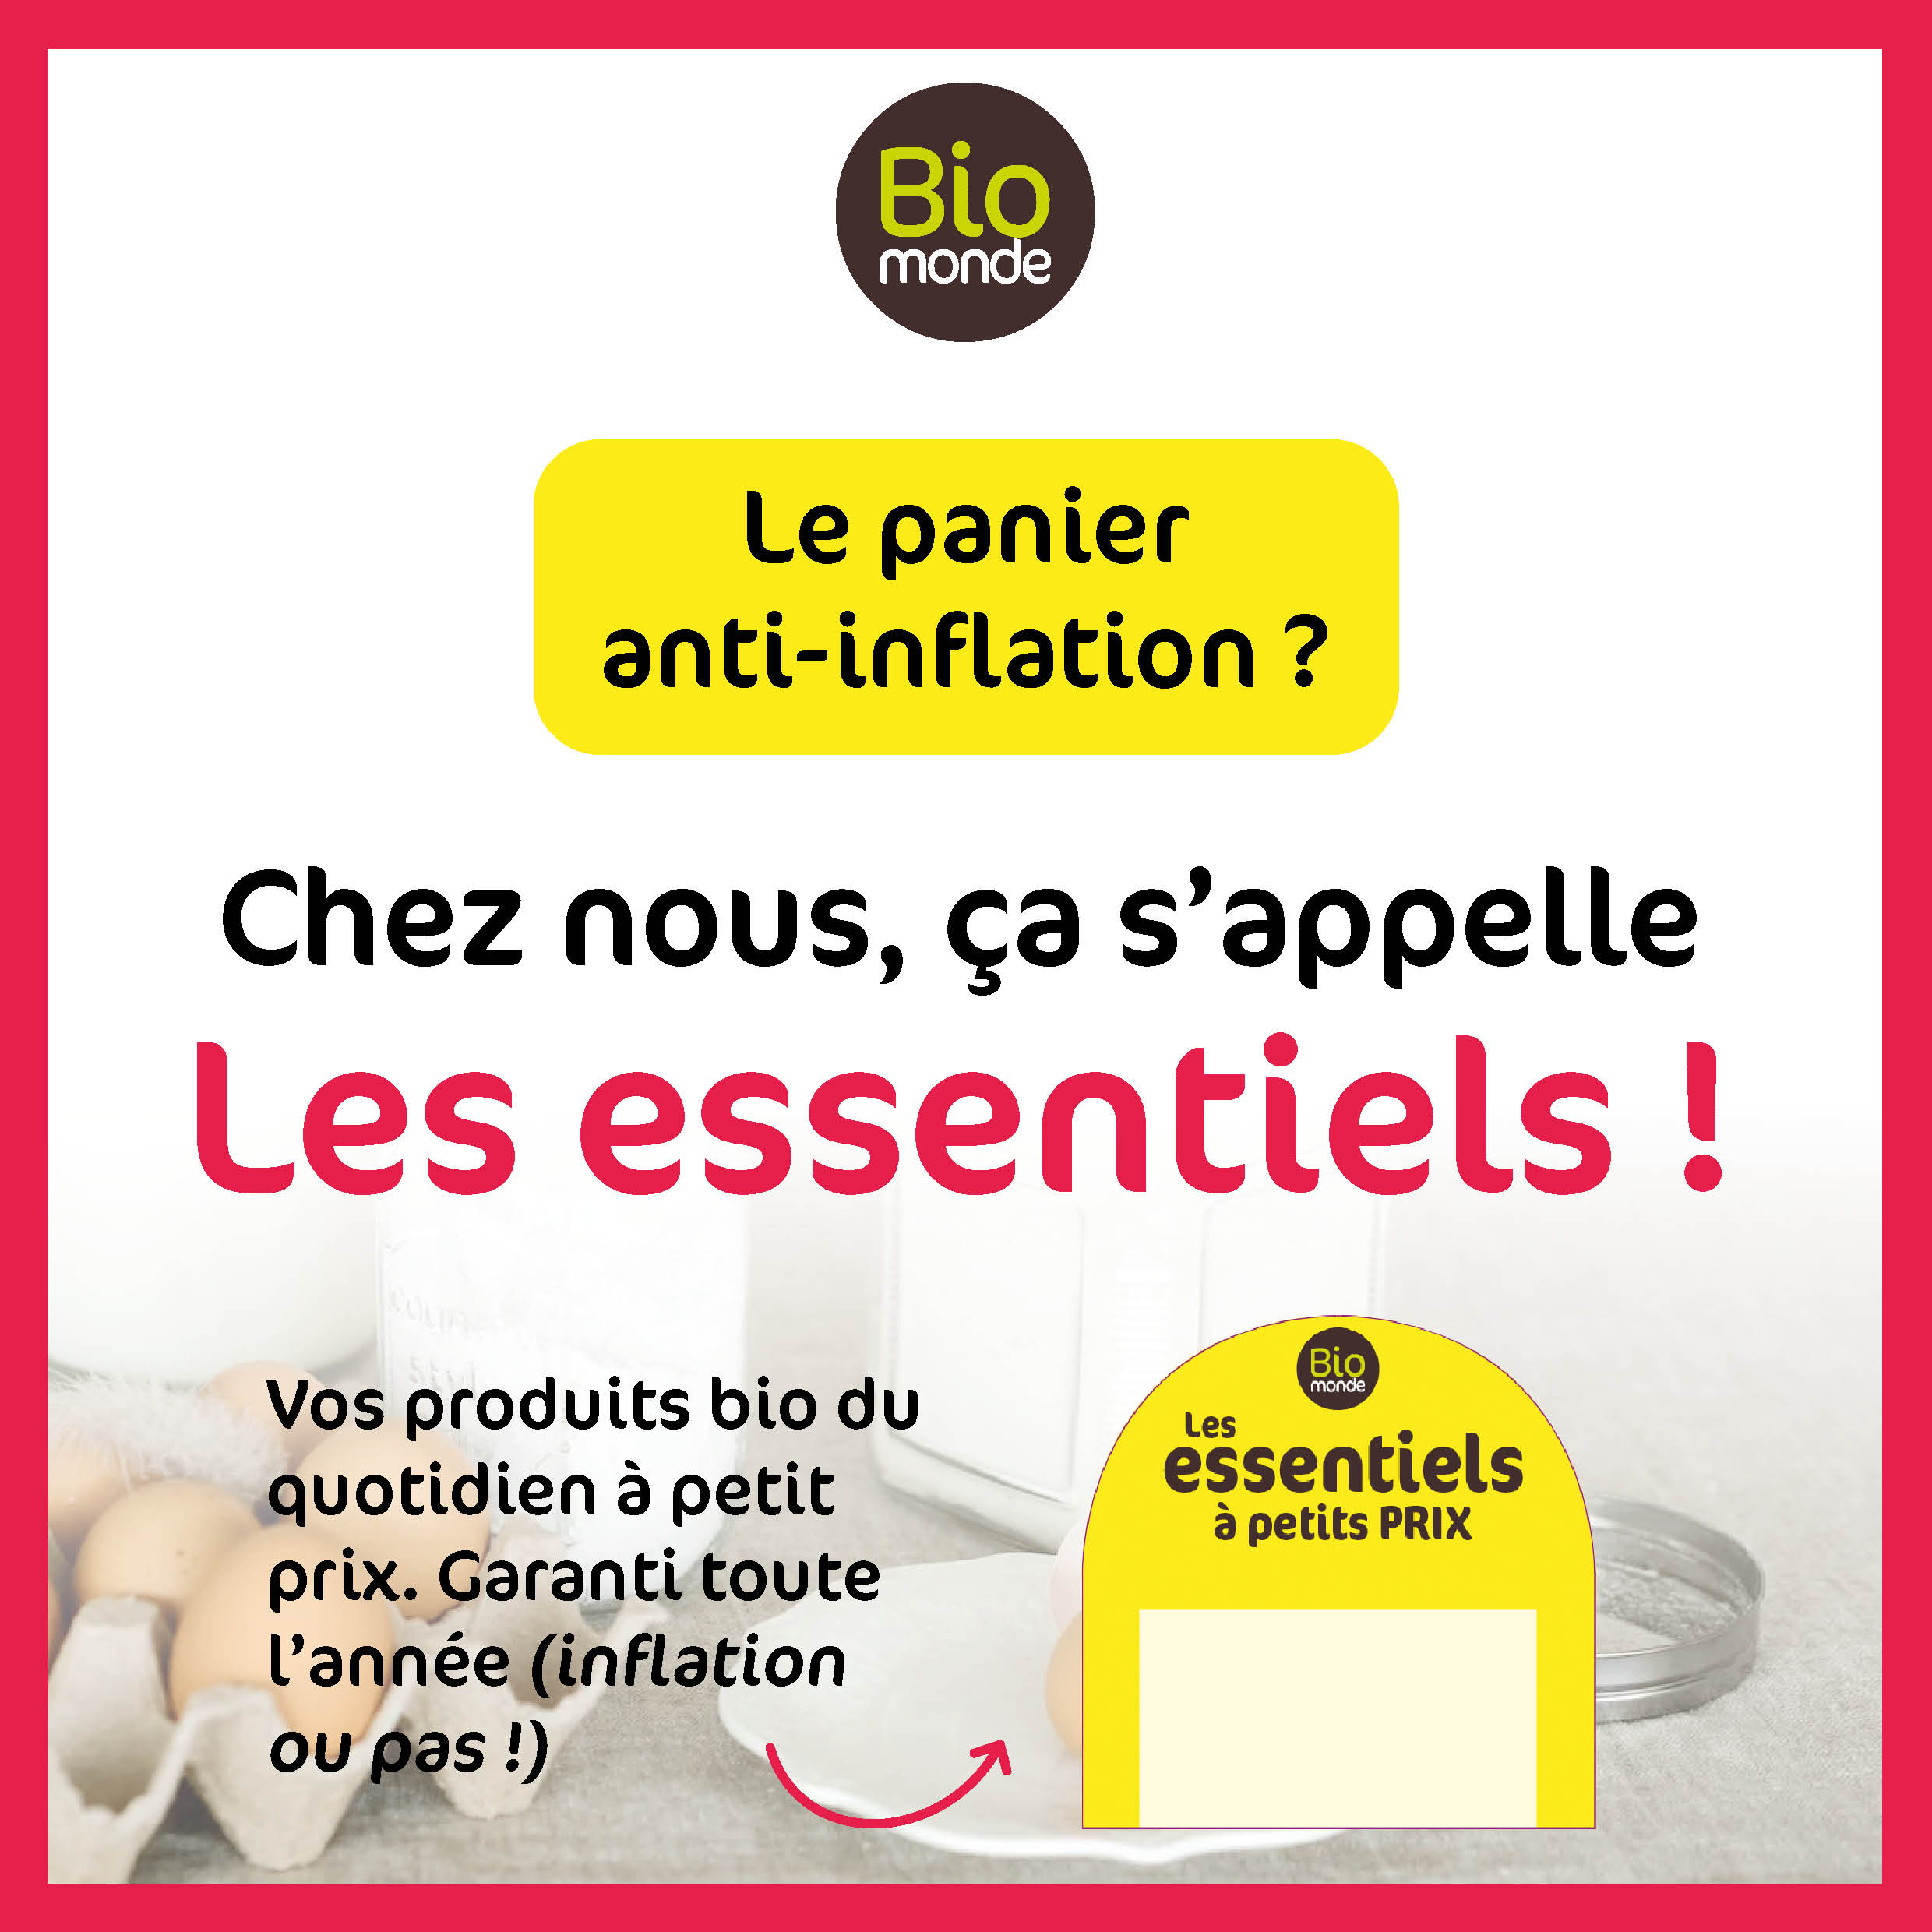 Le panier anti-inflation